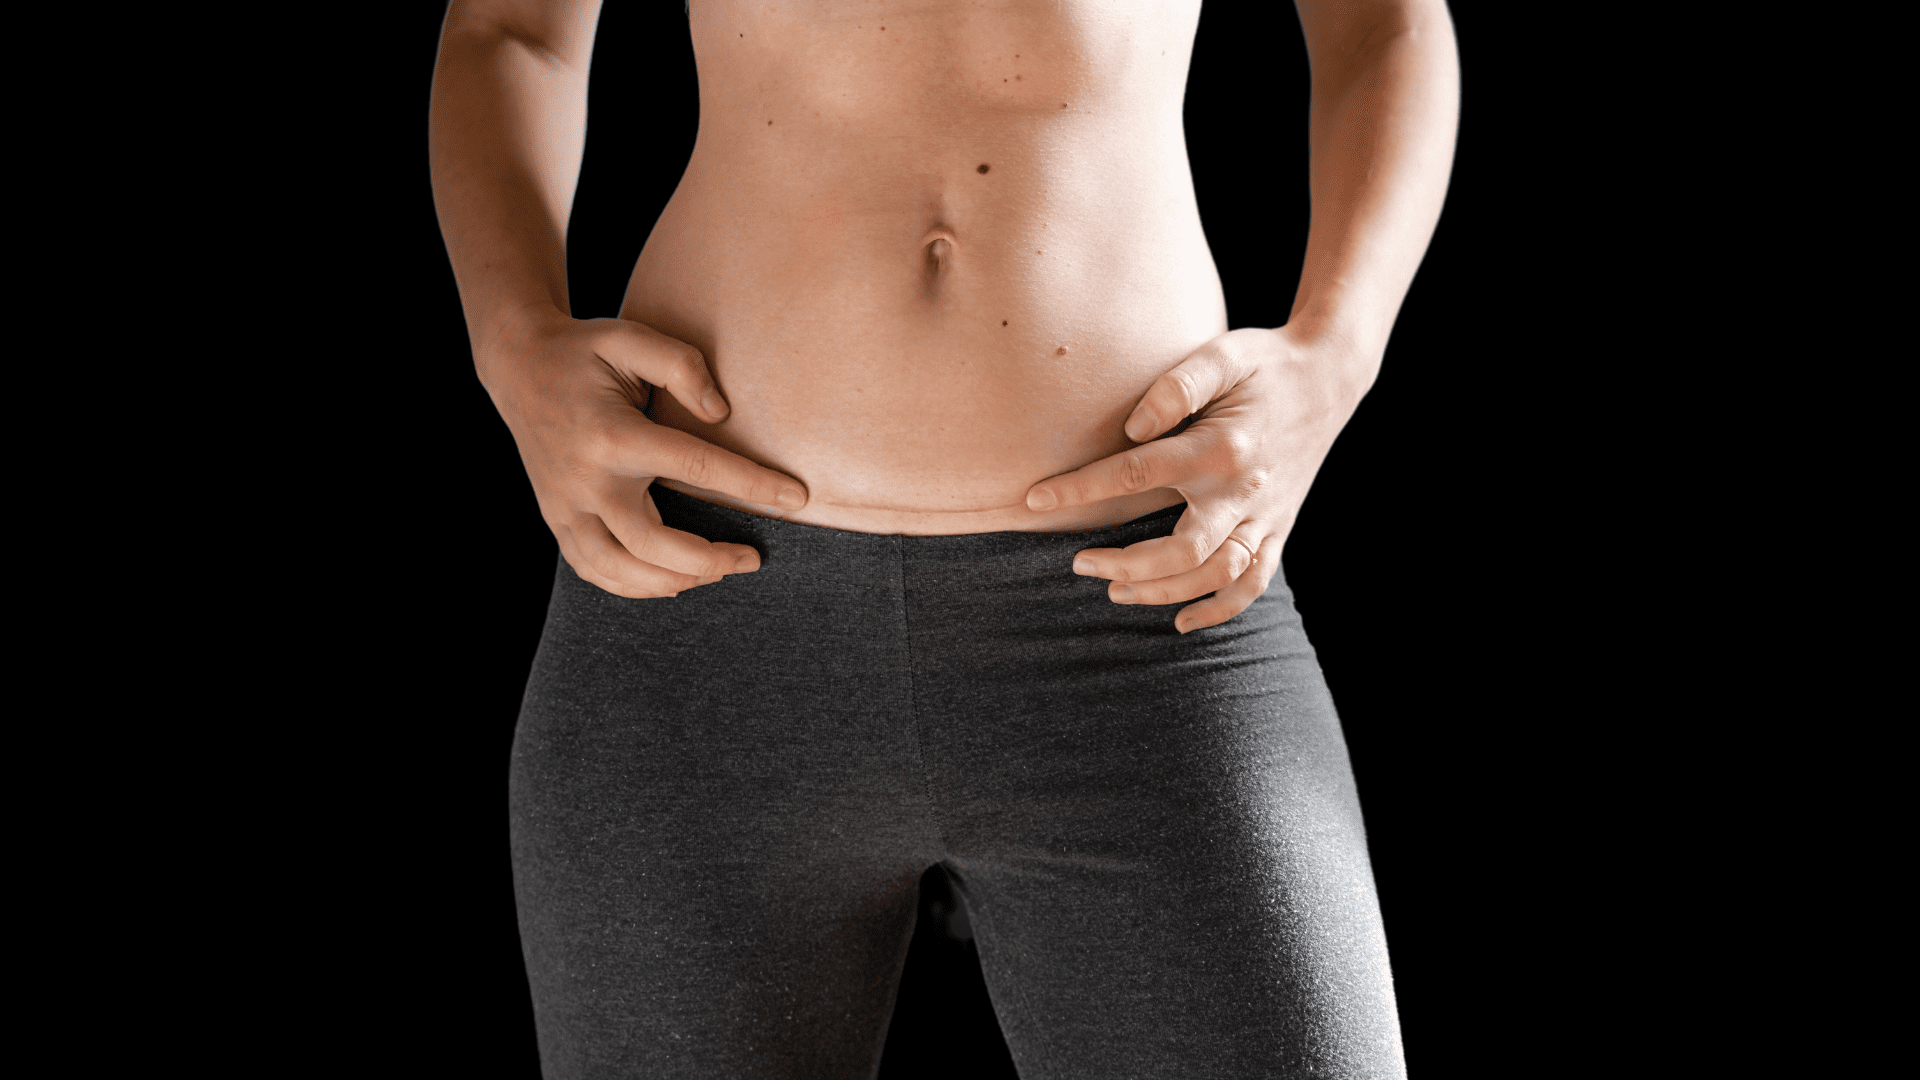 do's and don'ts after abdominoplasty surgery